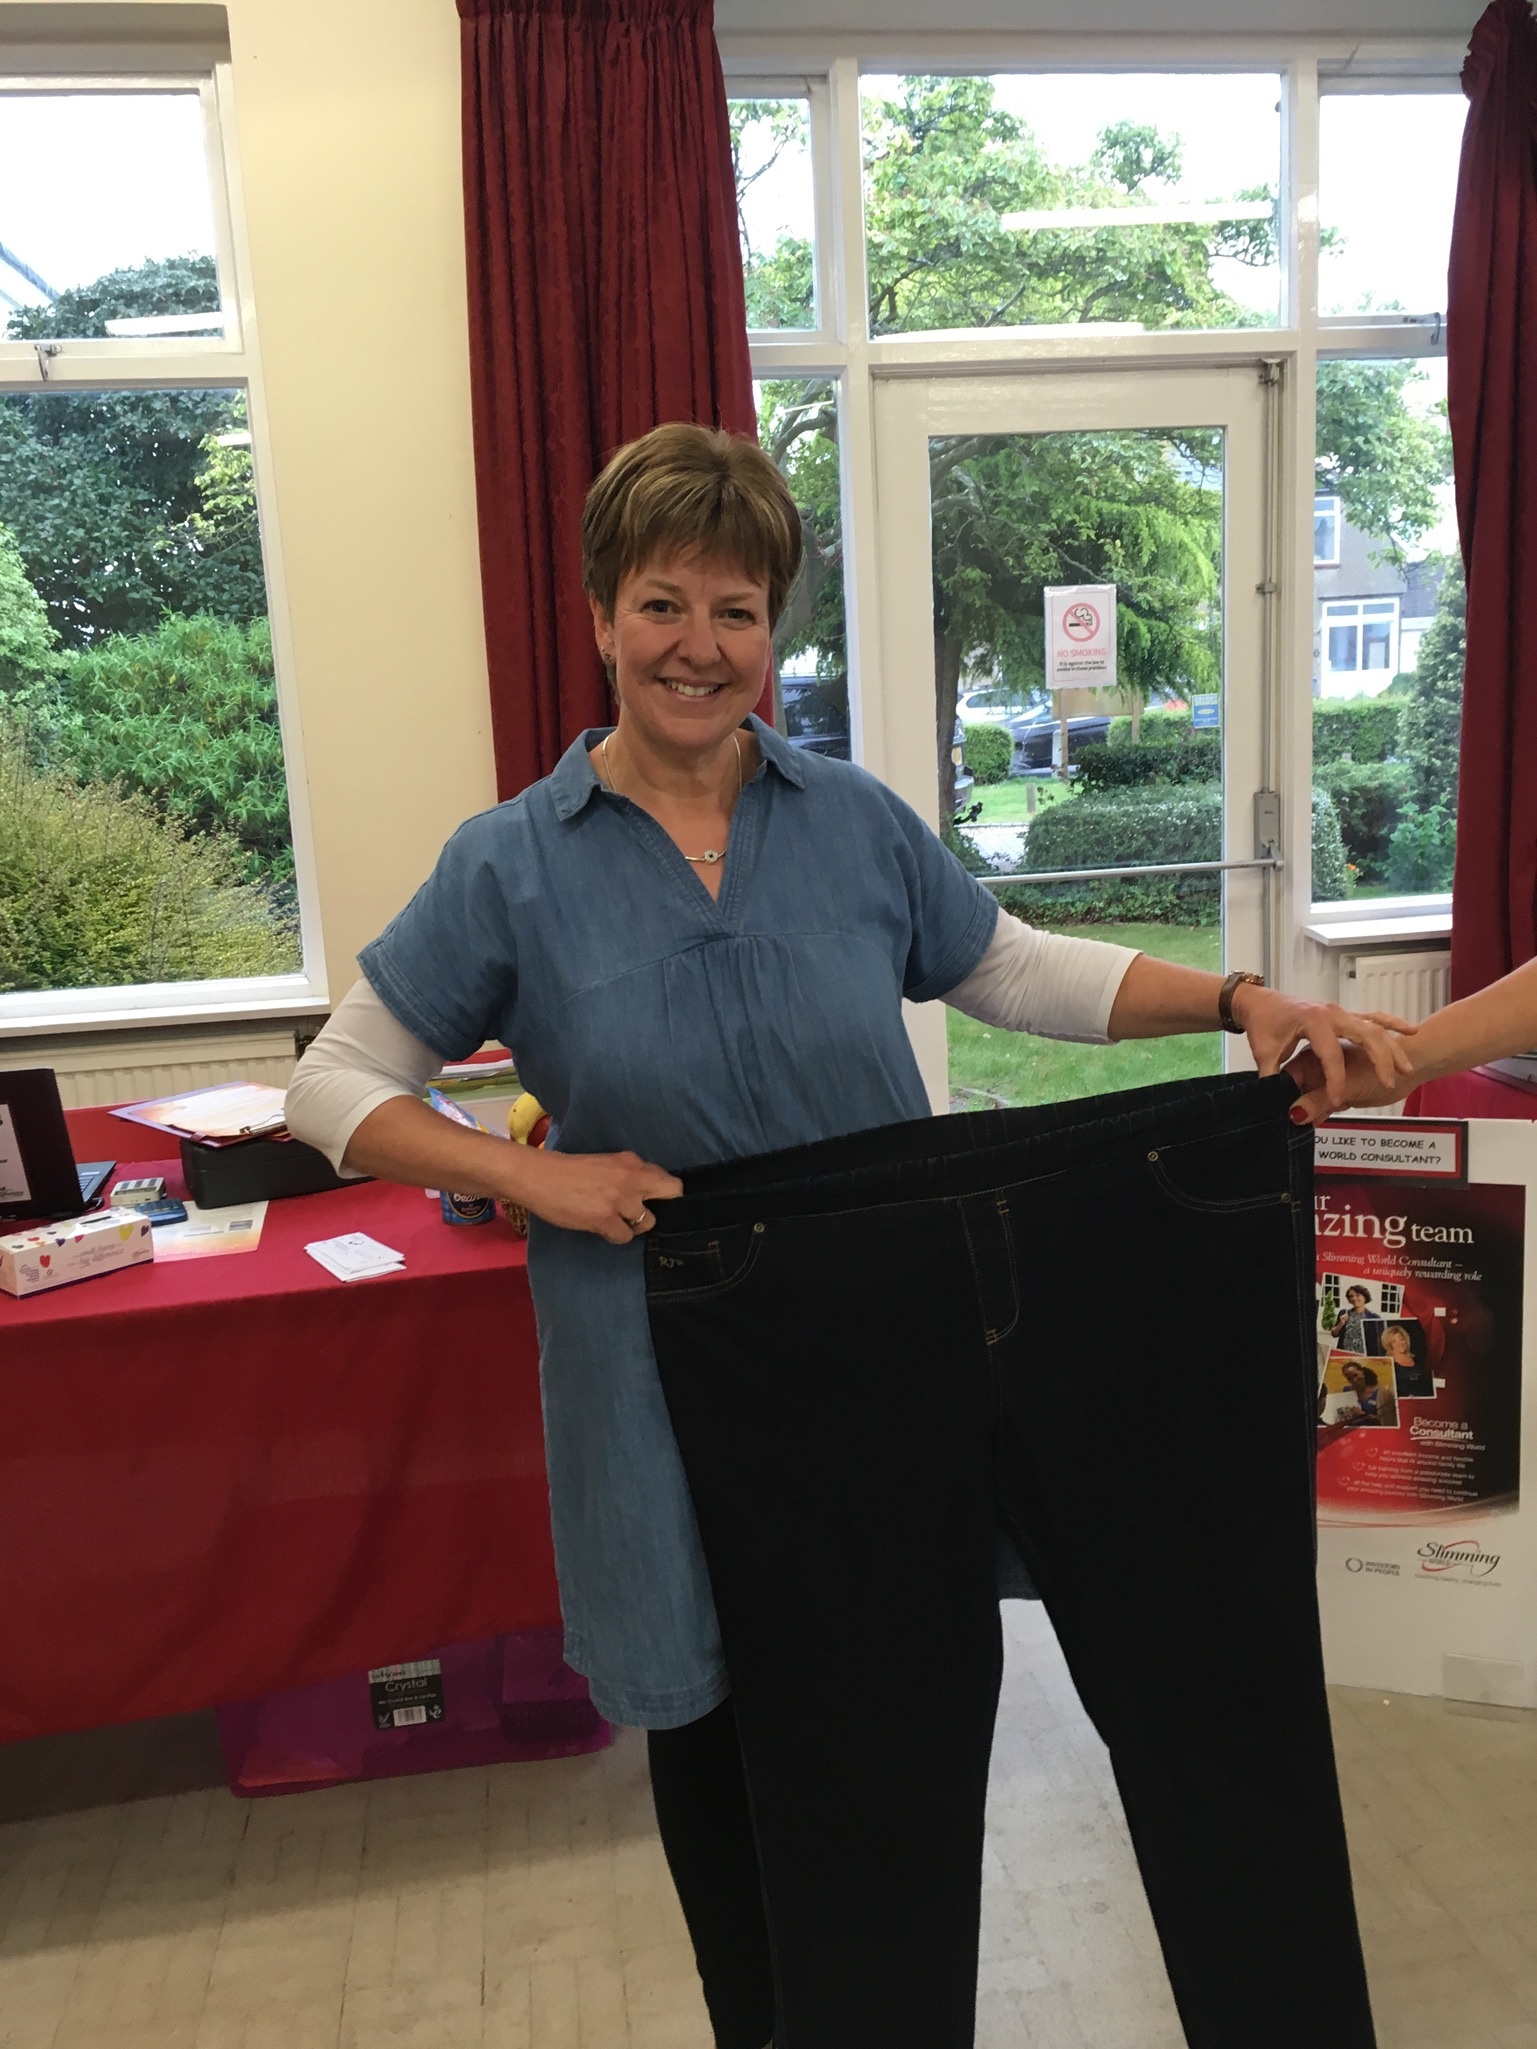 'We slimmed down for Cancer Research'